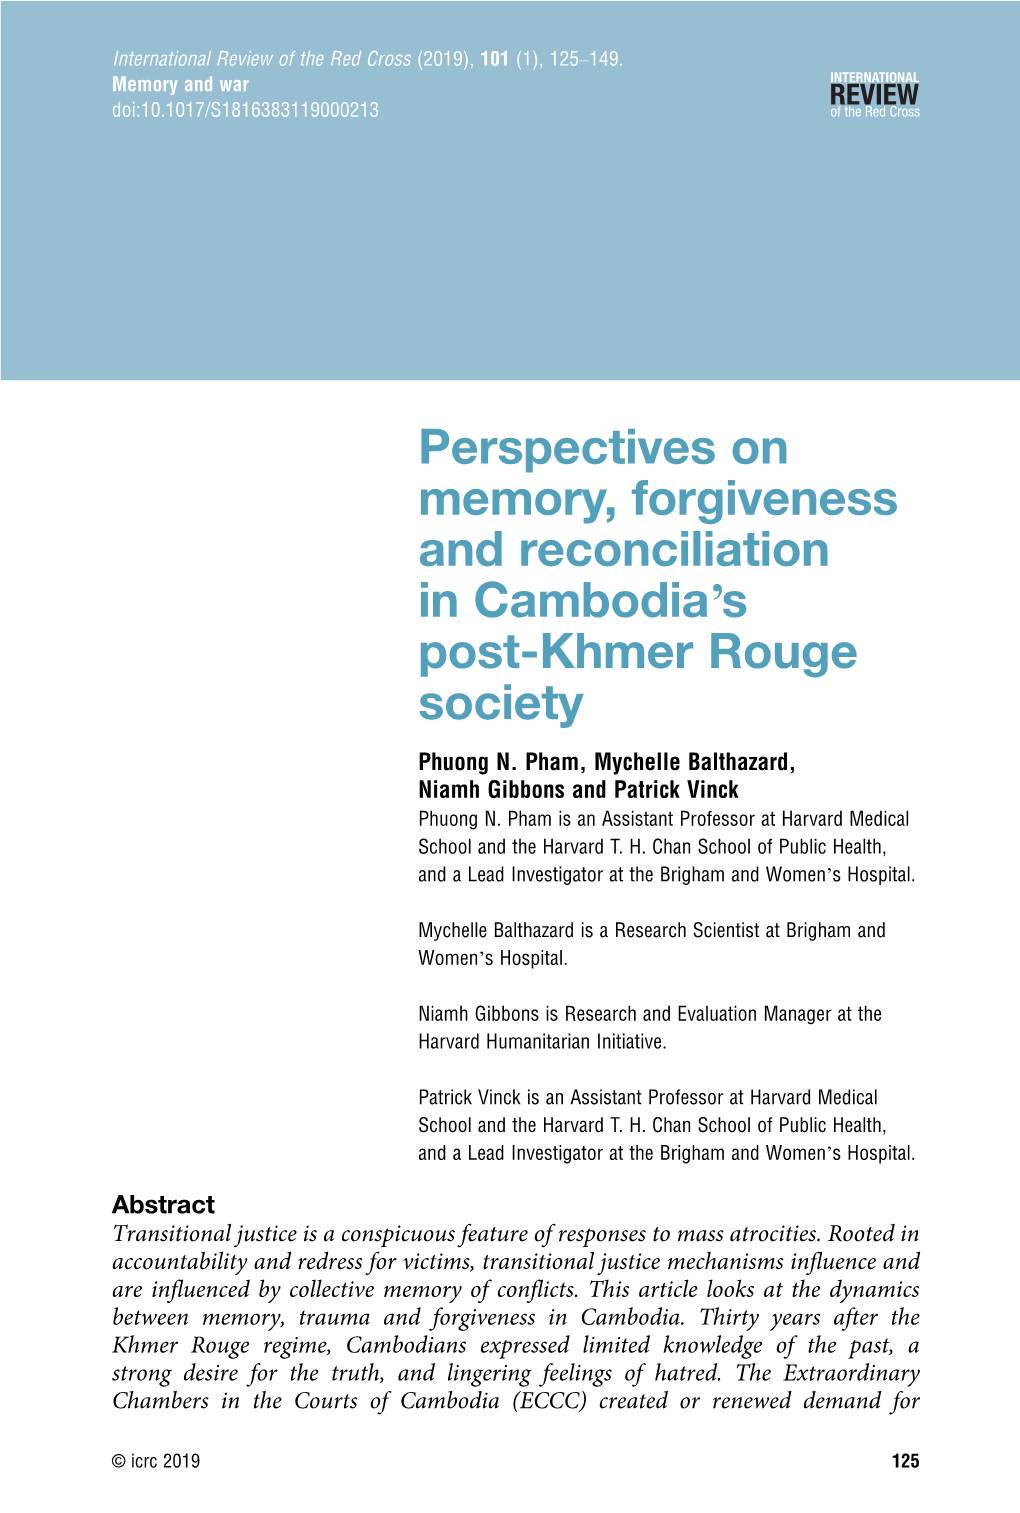 Perspectives on Memory, Forgiveness and Reconciliation in Cambodia's Post-Khmer Rouge Society